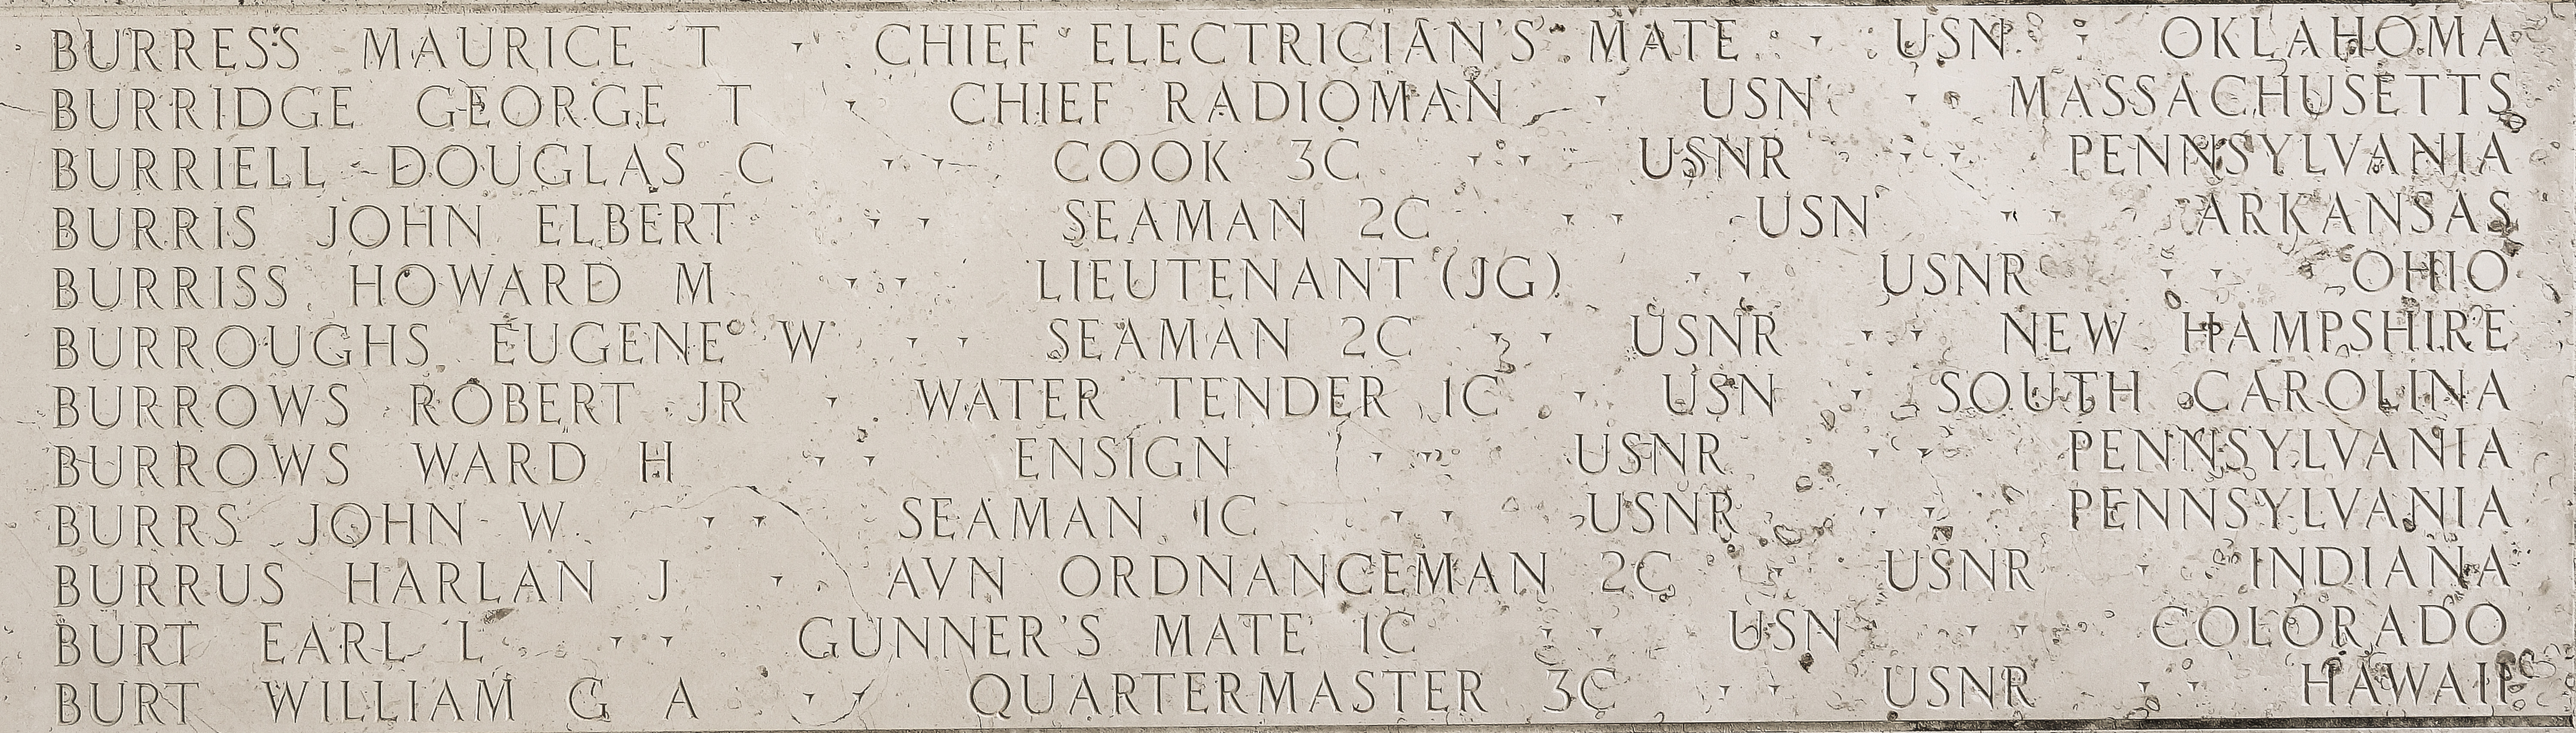 Maurice T. Burress, Chief Electrician's Mate